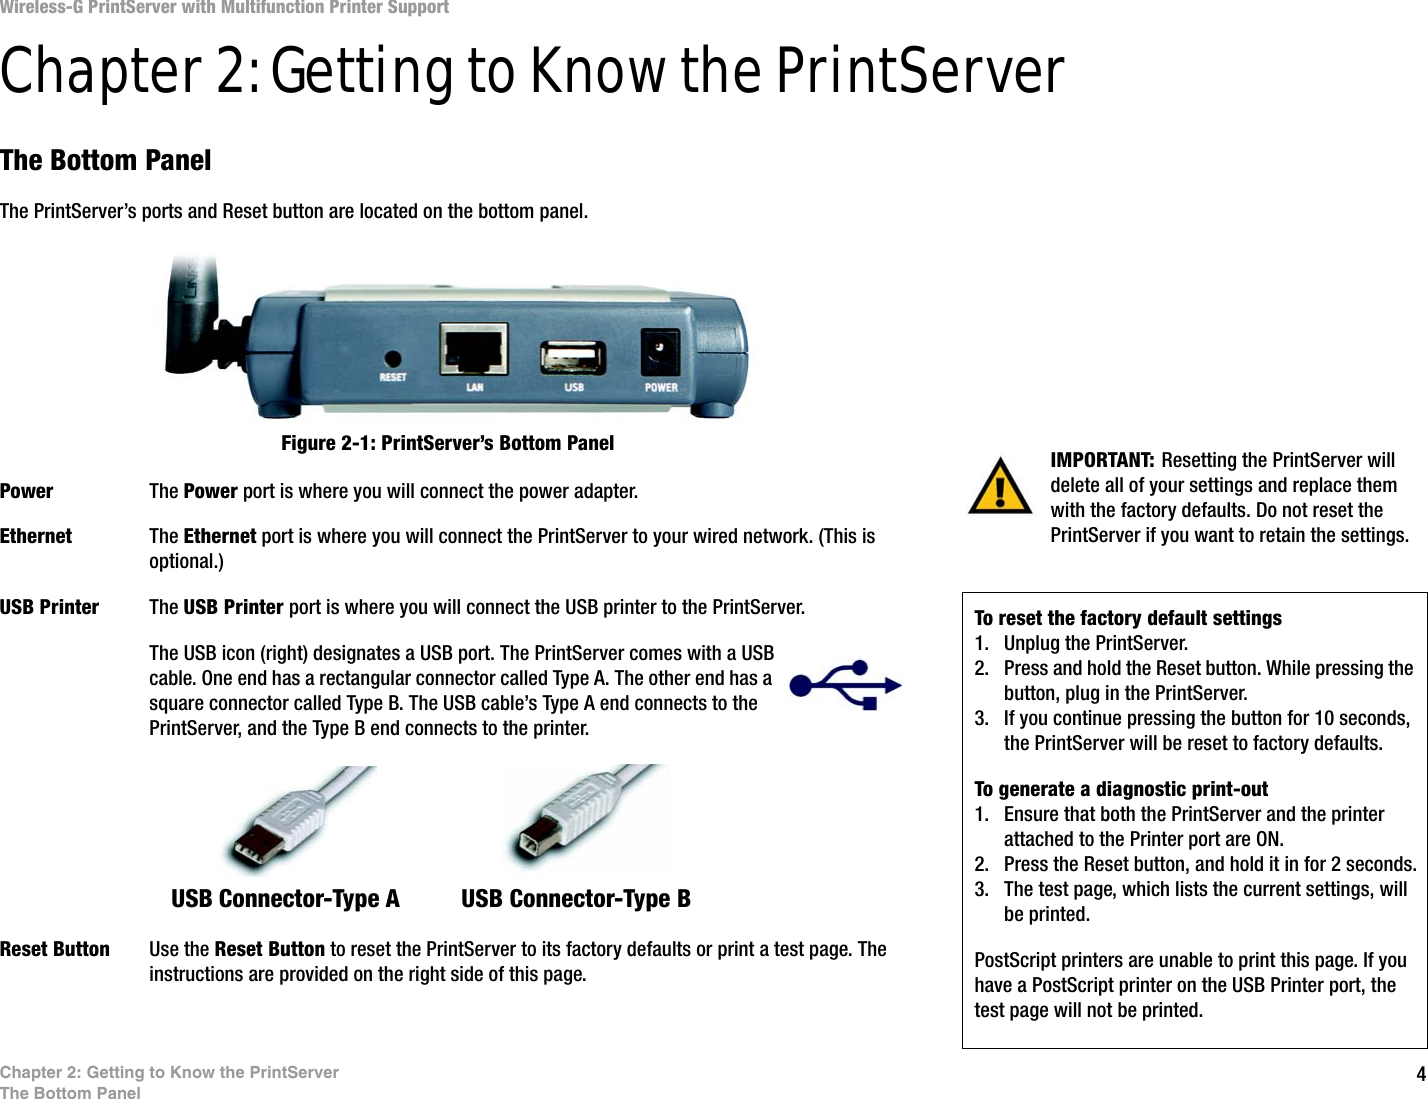 4Chapter 2: Getting to Know the PrintServerThe Bottom PanelWireless-G PrintServer with Multifunction Printer SupportChapter 2: Getting to Know the PrintServerThe Bottom PanelThe PrintServer’s ports and Reset button are located on the bottom panel.Power The Power port is where you will connect the power adapter.Ethernet The Ethernet port is where you will connect the PrintServer to your wired network. (This is optional.)USB Printer The USB Printer port is where you will connect the USB printer to the PrintServer.The USB icon (right) designates a USB port. The PrintServer comes with a USB cable. One end has a rectangular connector called Type A. The other end has a square connector called Type B. The USB cable’s Type A end connects to the PrintServer, and the Type B end connects to the printer. Reset Button Use the Reset Button to reset the PrintServer to its factory defaults or print a test page. The instructions are provided on the right side of this page.IMPORTANT: Resetting the PrintServer will delete all of your settings and replace them with the factory defaults. Do not reset the PrintServer if you want to retain the settings.Figure 2-1: PrintServer’s Bottom PanelTo reset the factory default settings1. Unplug the PrintServer.2. Press and hold the Reset button. While pressing the button, plug in the PrintServer.3. If you continue pressing the button for 10 seconds, the PrintServer will be reset to factory defaults.To generate a diagnostic print-out1. Ensure that both the PrintServer and the printer attached to the Printer port are ON.2. Press the Reset button, and hold it in for 2 seconds.3. The test page, which lists the current settings, will be printed. PostScript printers are unable to print this page. If you have a PostScript printer on the USB Printer port, the test page will not be printed.USB Connector-Type A  USB Connector-Type B 